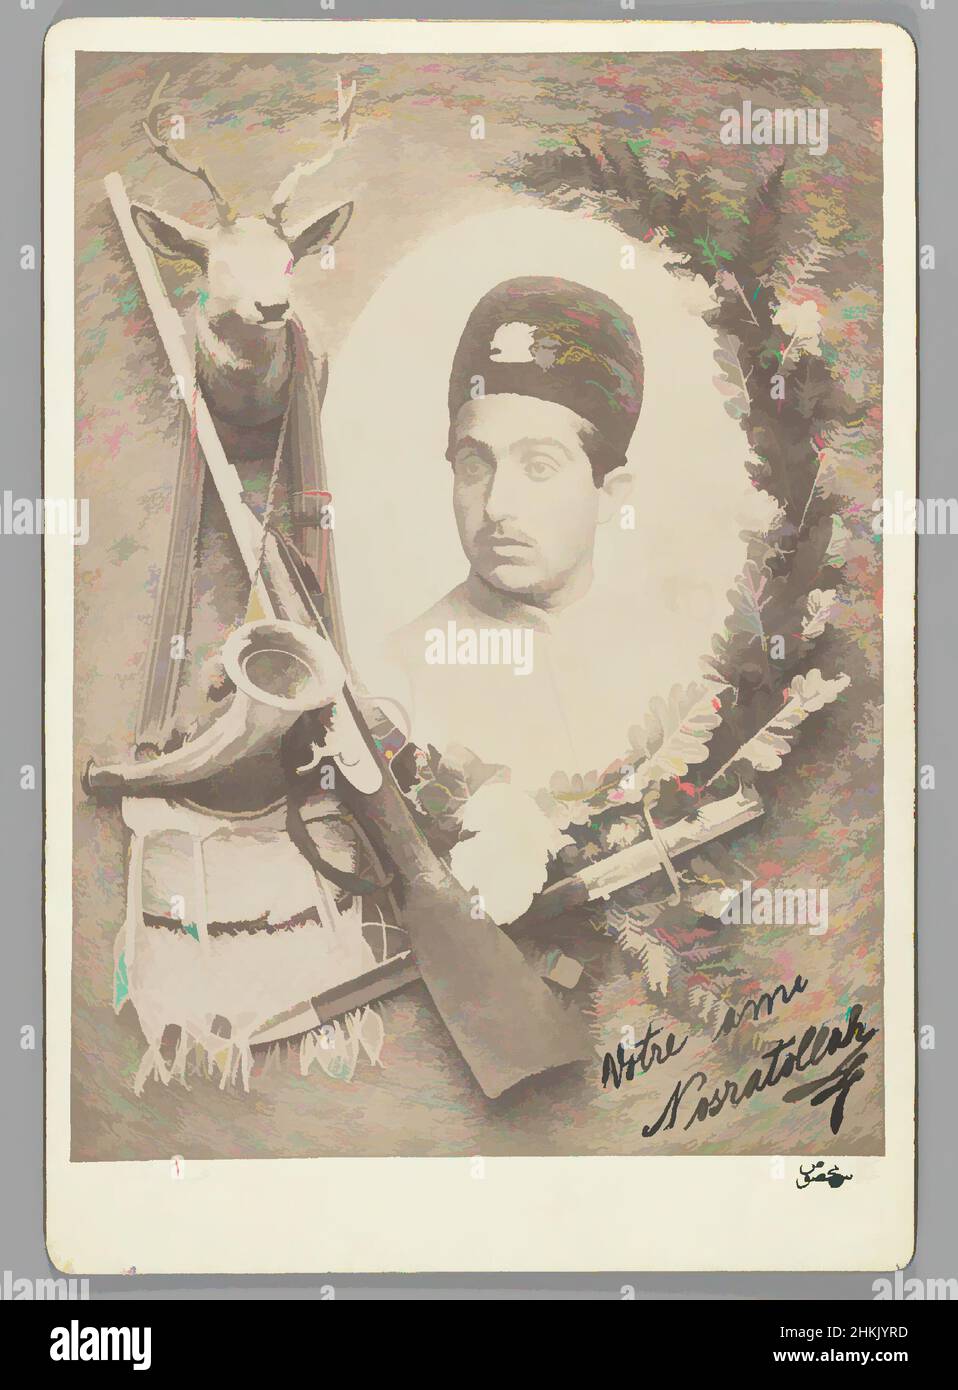 Art inspired by Official Royal Portrait of Prince Nosratollah, One of 274 Vintage Photographs, Abdullah Qajar, Albumen silver photograph, 1899, Qajar, Qajar Period, photograph: 8 5/8 x 6 5/16 in., 21.9 x 16 cm, 19th century, albumen silver photograph, antlers, arabic, bag, carte de, Classic works modernized by Artotop with a splash of modernity. Shapes, color and value, eye-catching visual impact on art. Emotions through freedom of artworks in a contemporary way. A timeless message pursuing a wildly creative new direction. Artists turning to the digital medium and creating the Artotop NFT Stock Photo